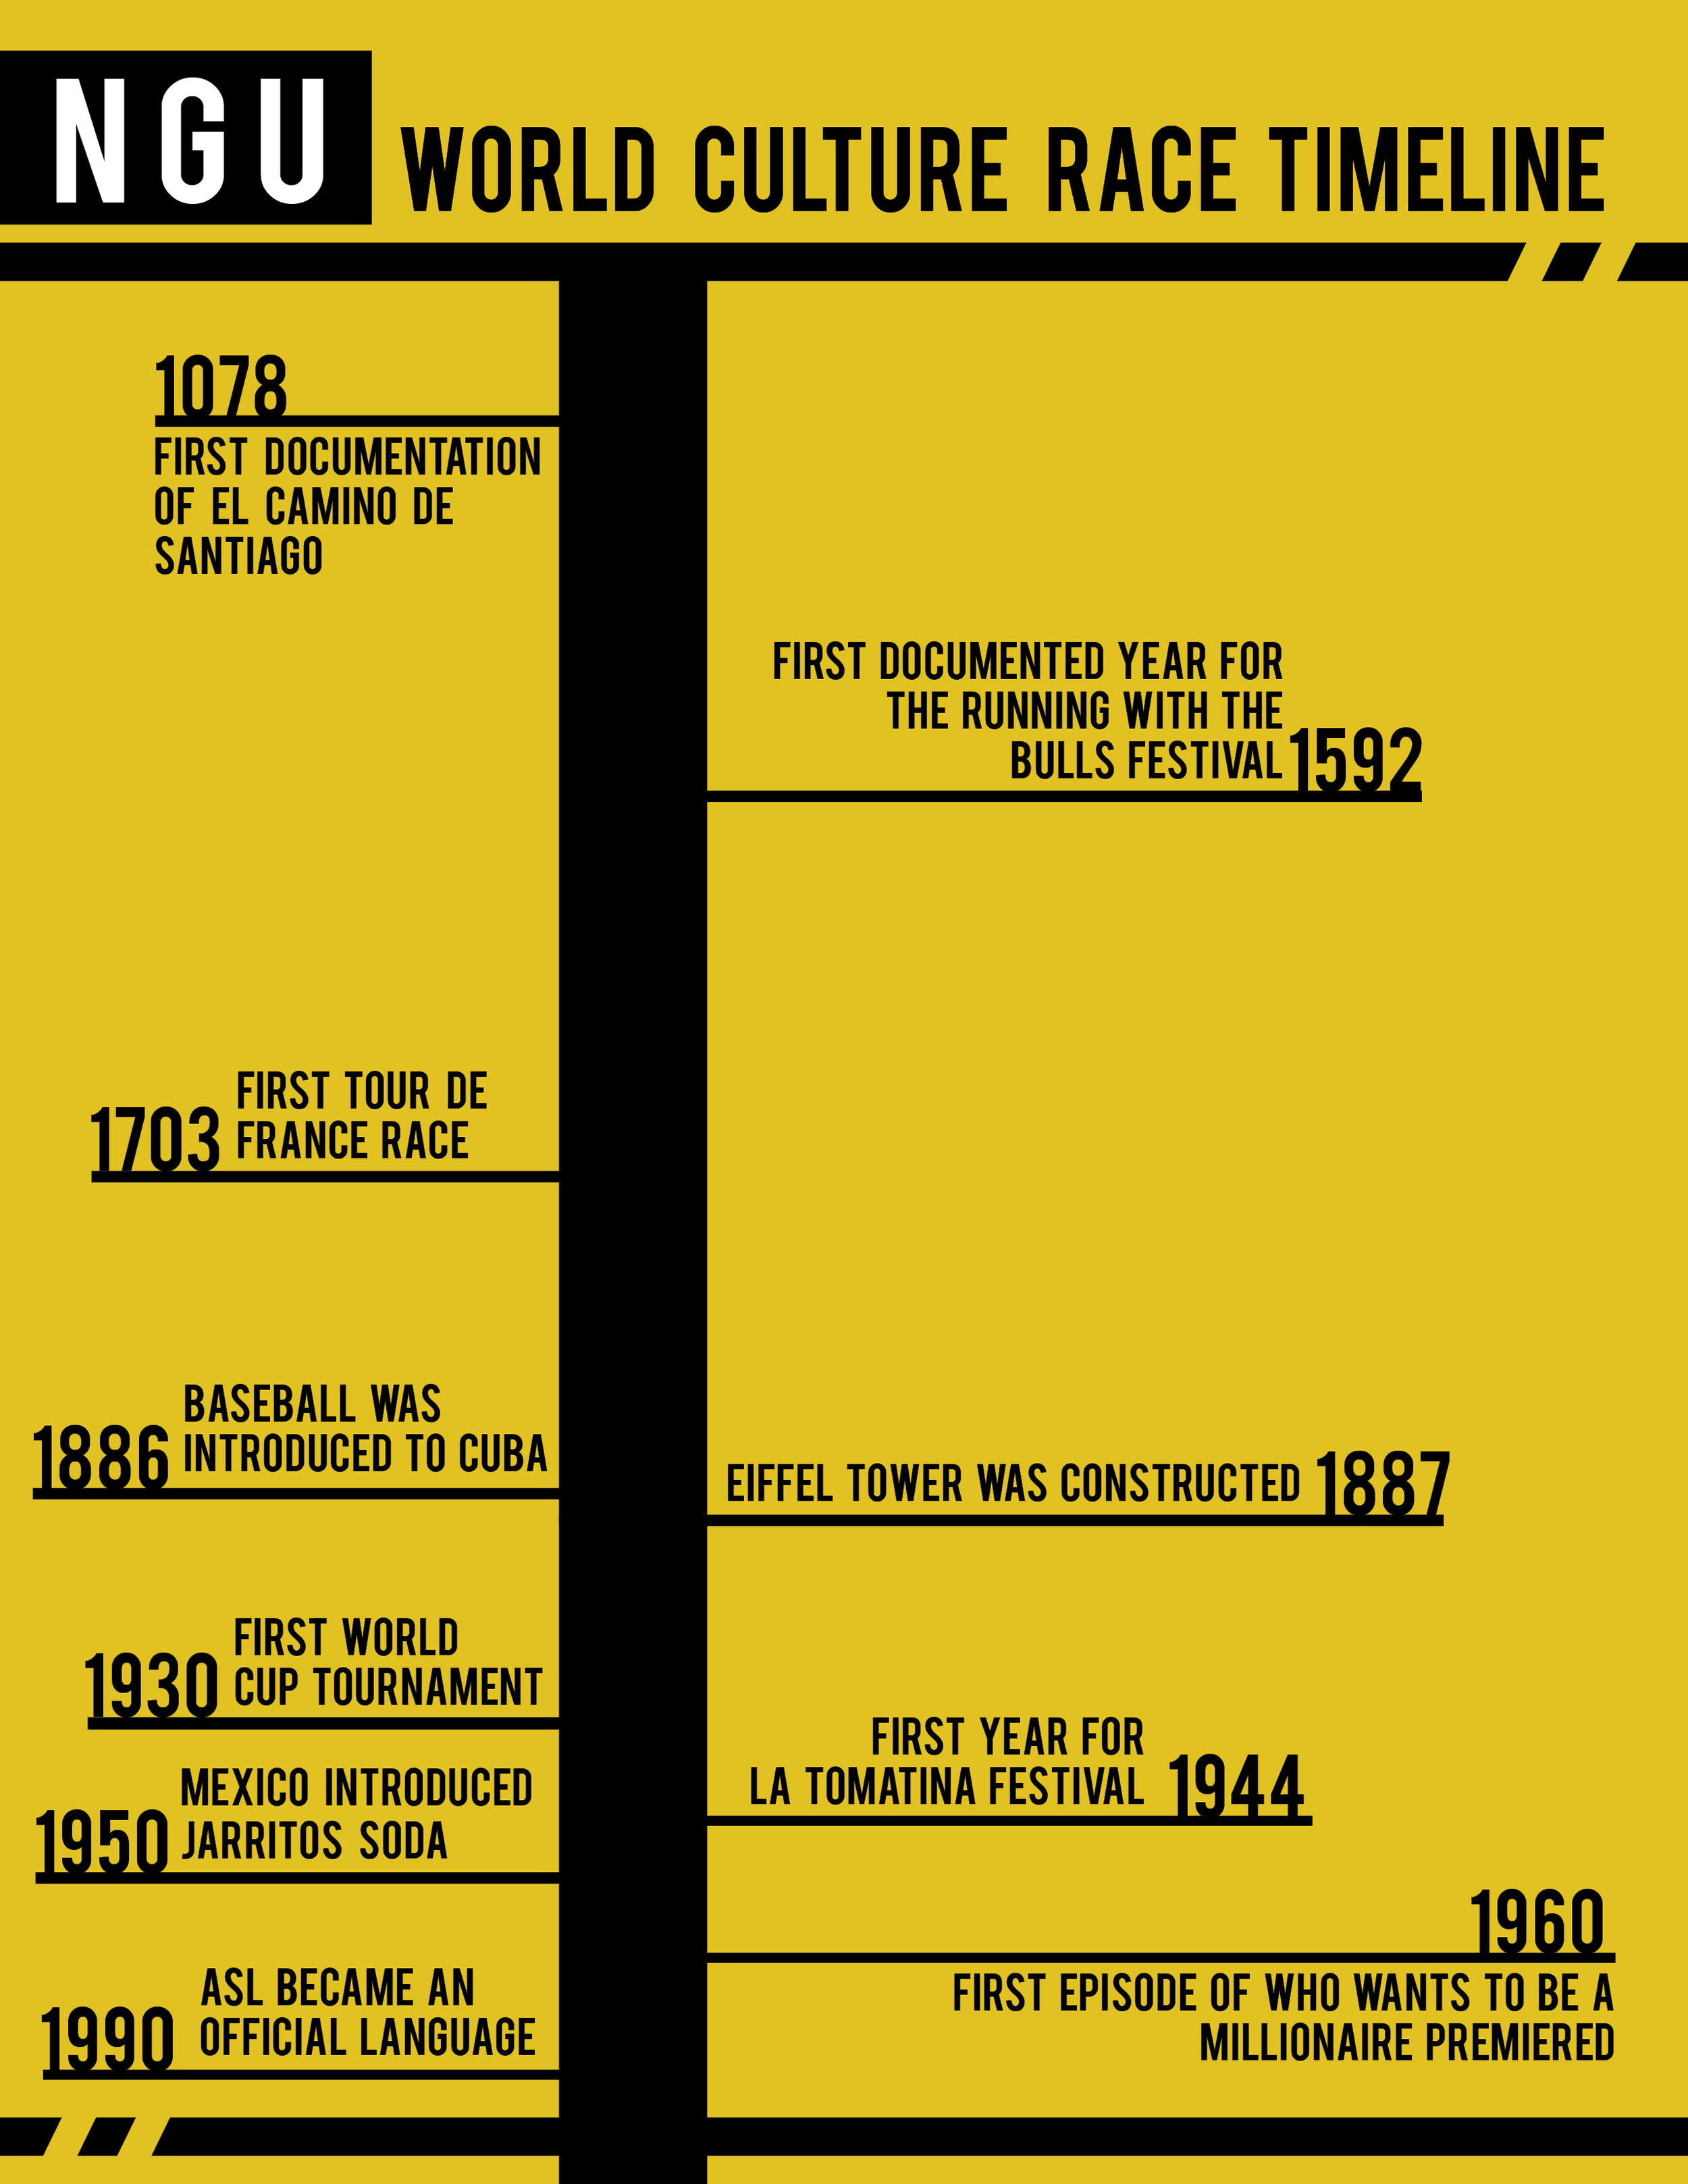 Timeline showing the history of the events used in the World Culture Race.